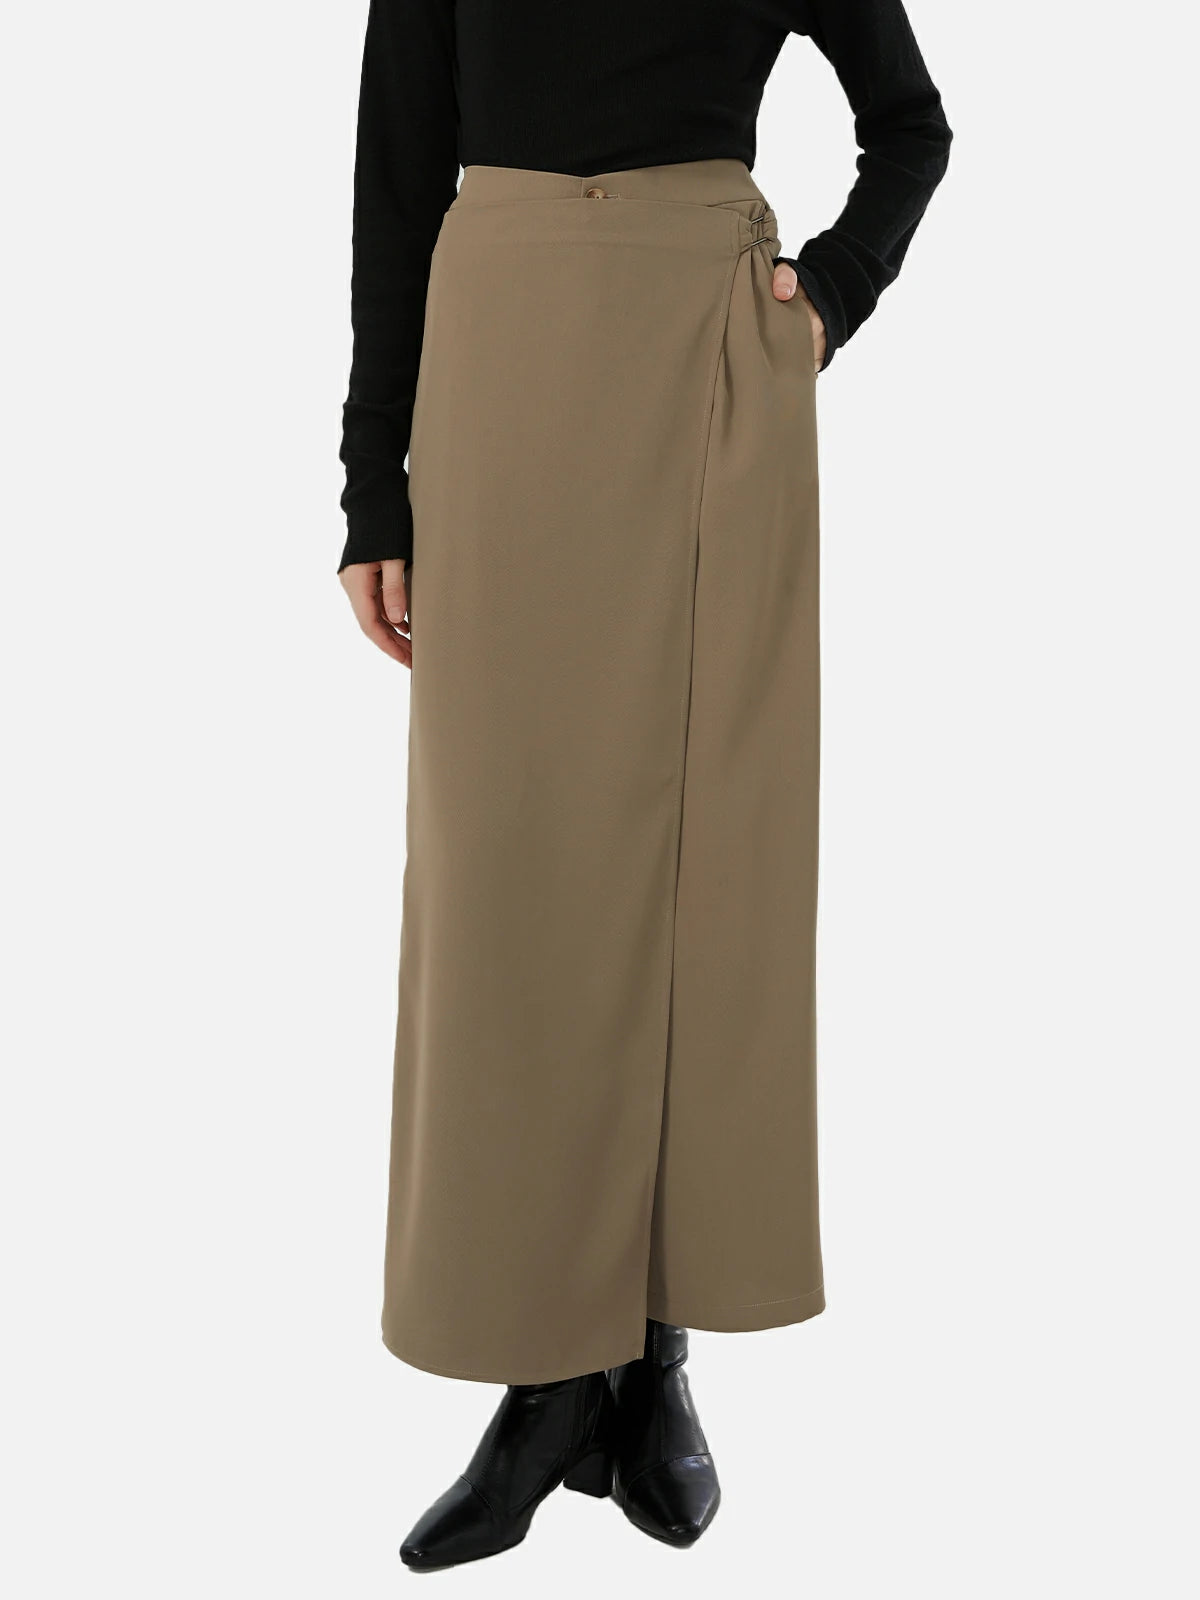 Women's casual clothing featuring elastic waist patchwork pocketed trousers